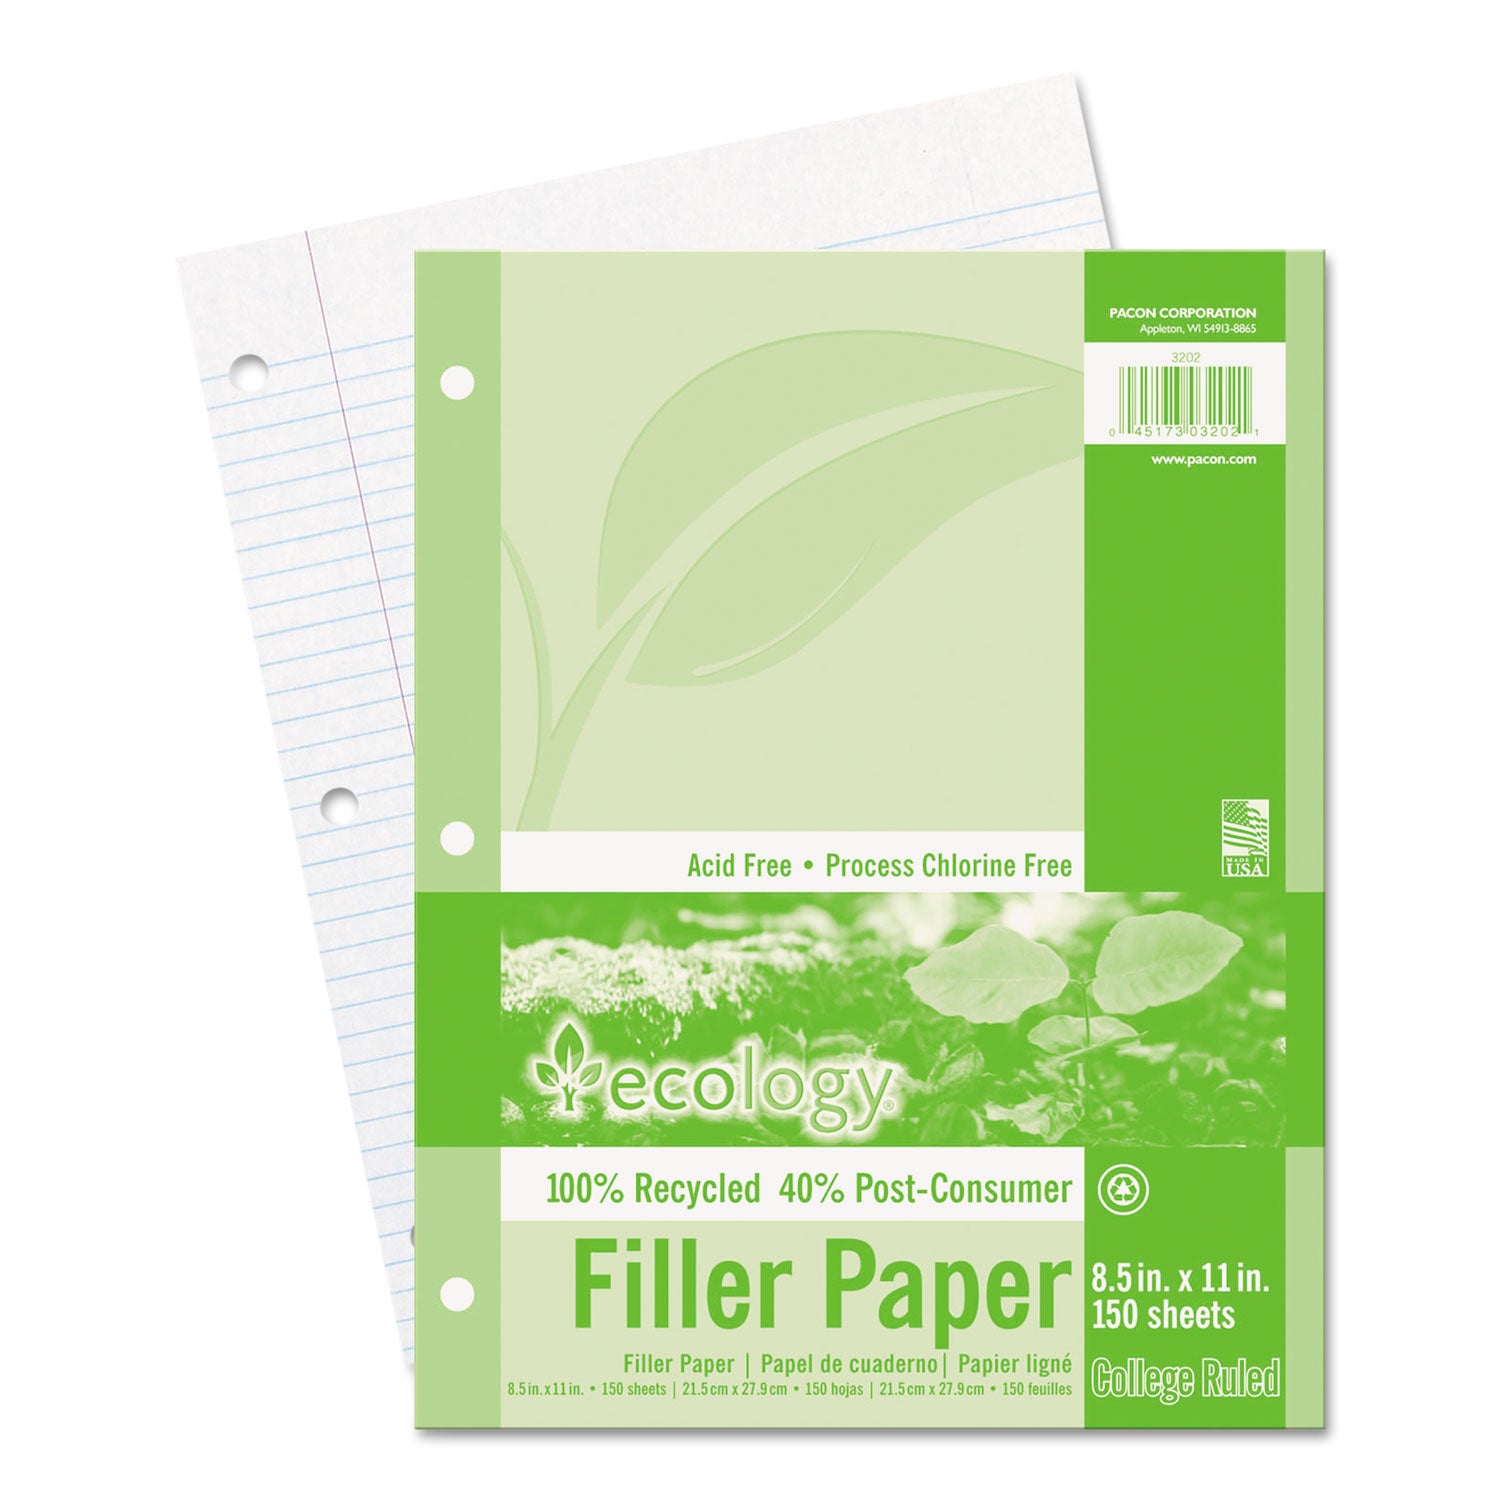 Ecology Filler Paper, 3-Hole, 8.5 x 11, Medium/College Rule, 150/Pack - 